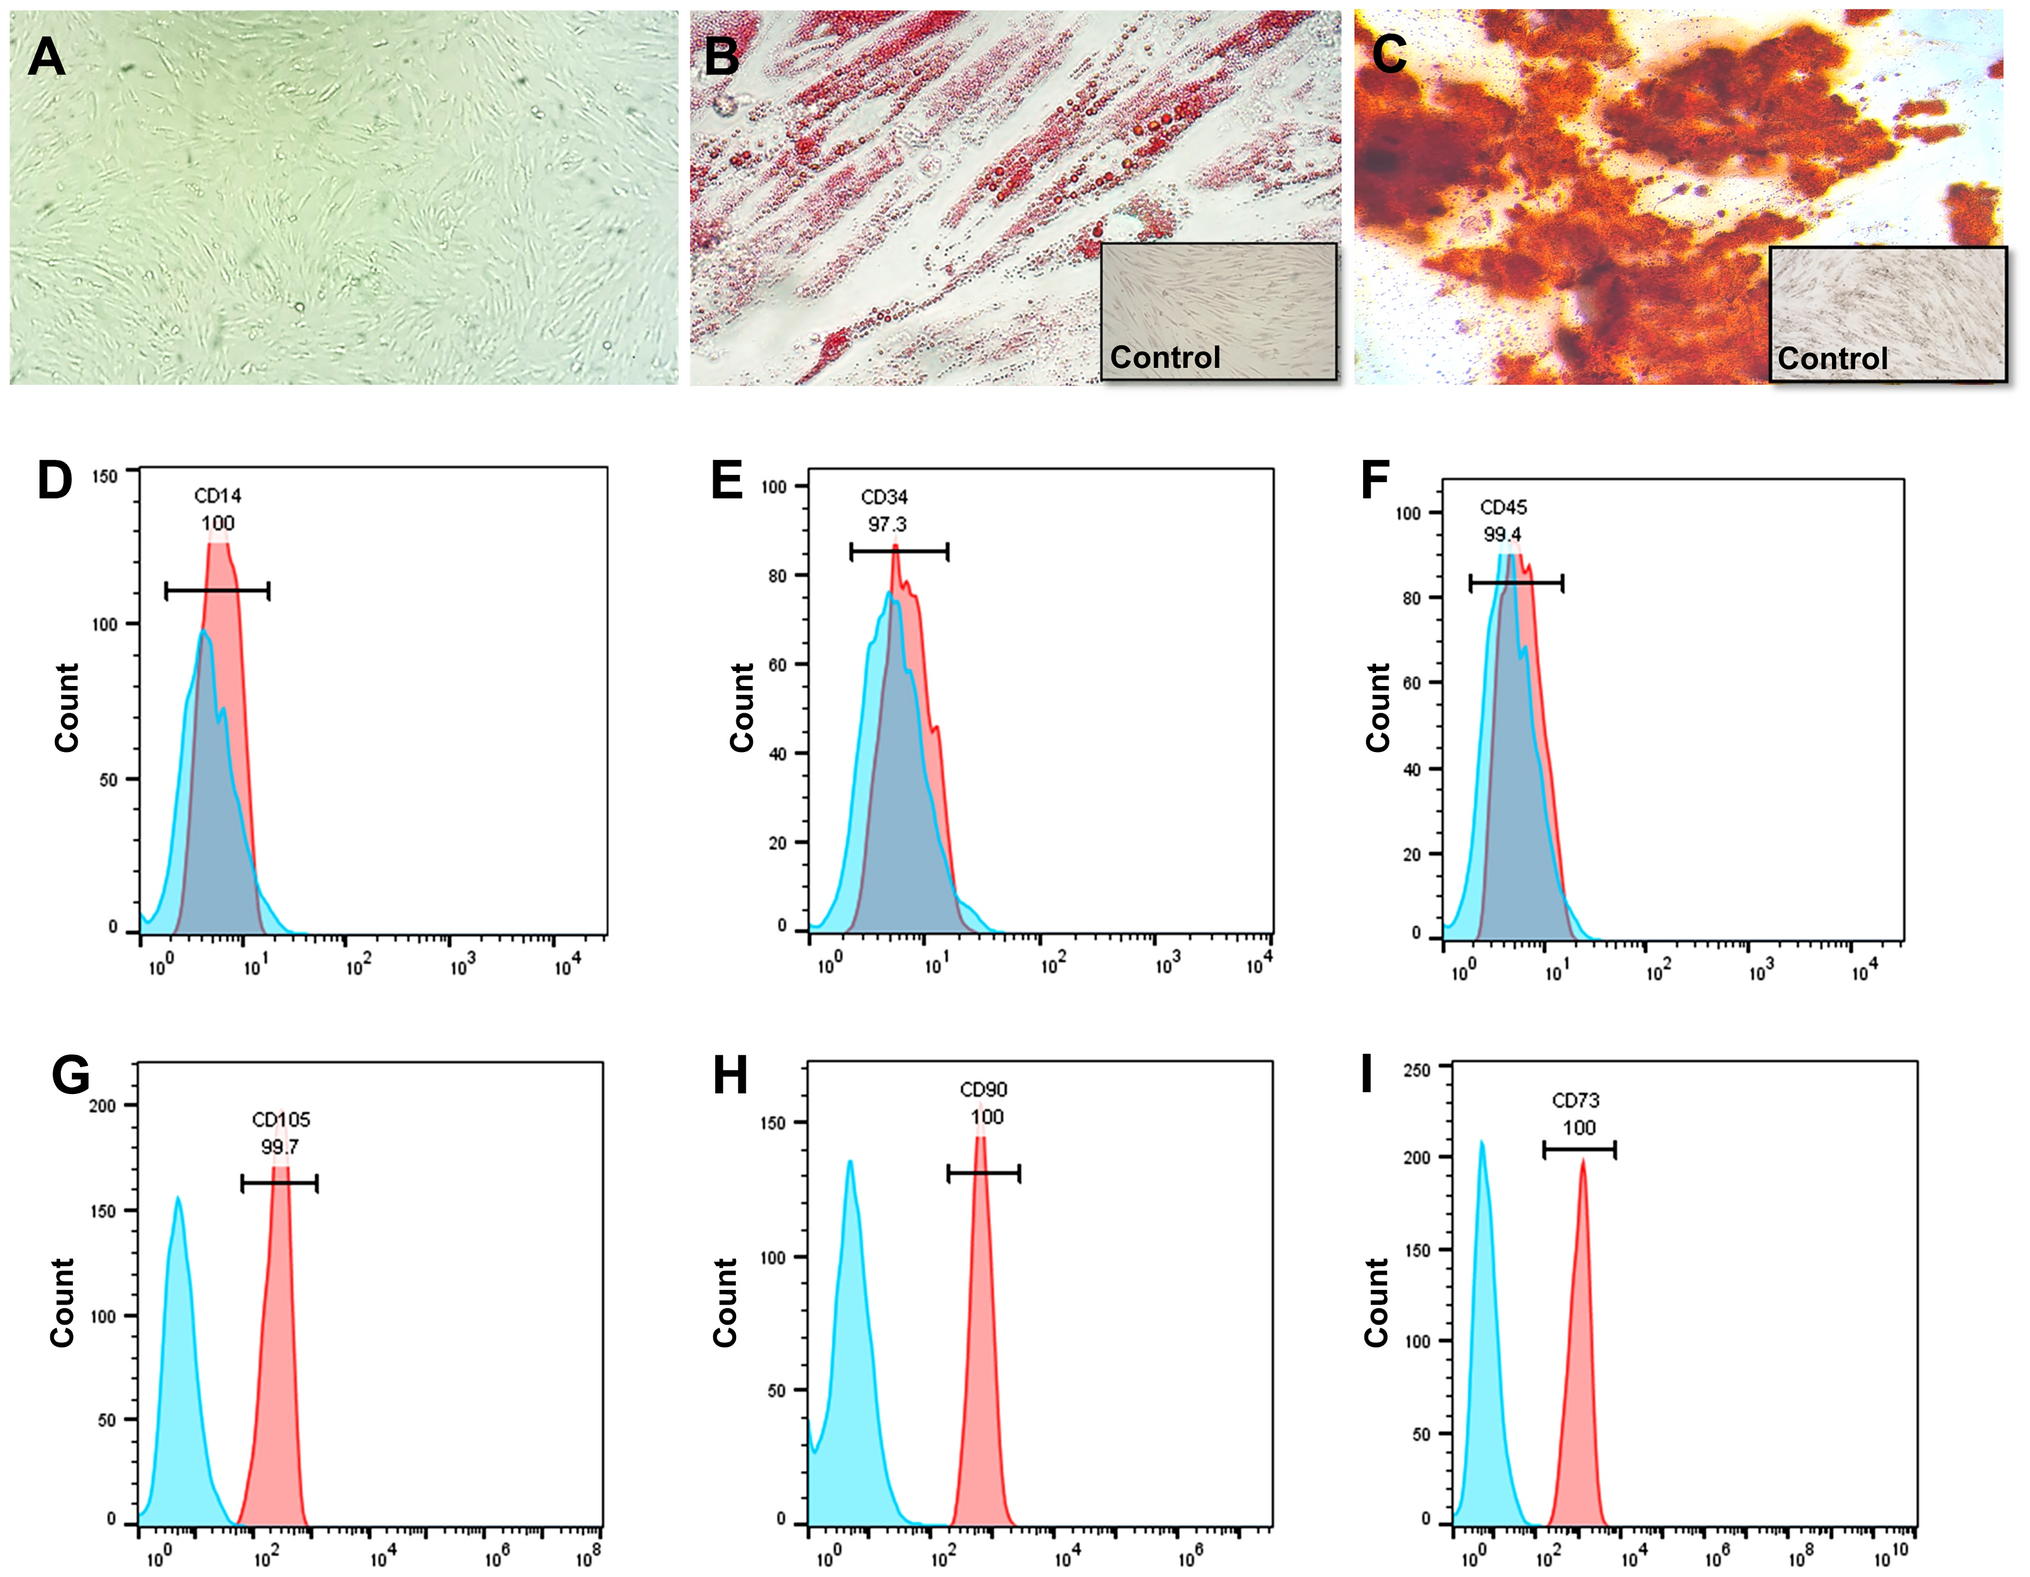 Synergistic effects of mesenchymal stem cell-derived extracellular vesicles and dexamethasone on macrophage polarization under inflammatory conditions